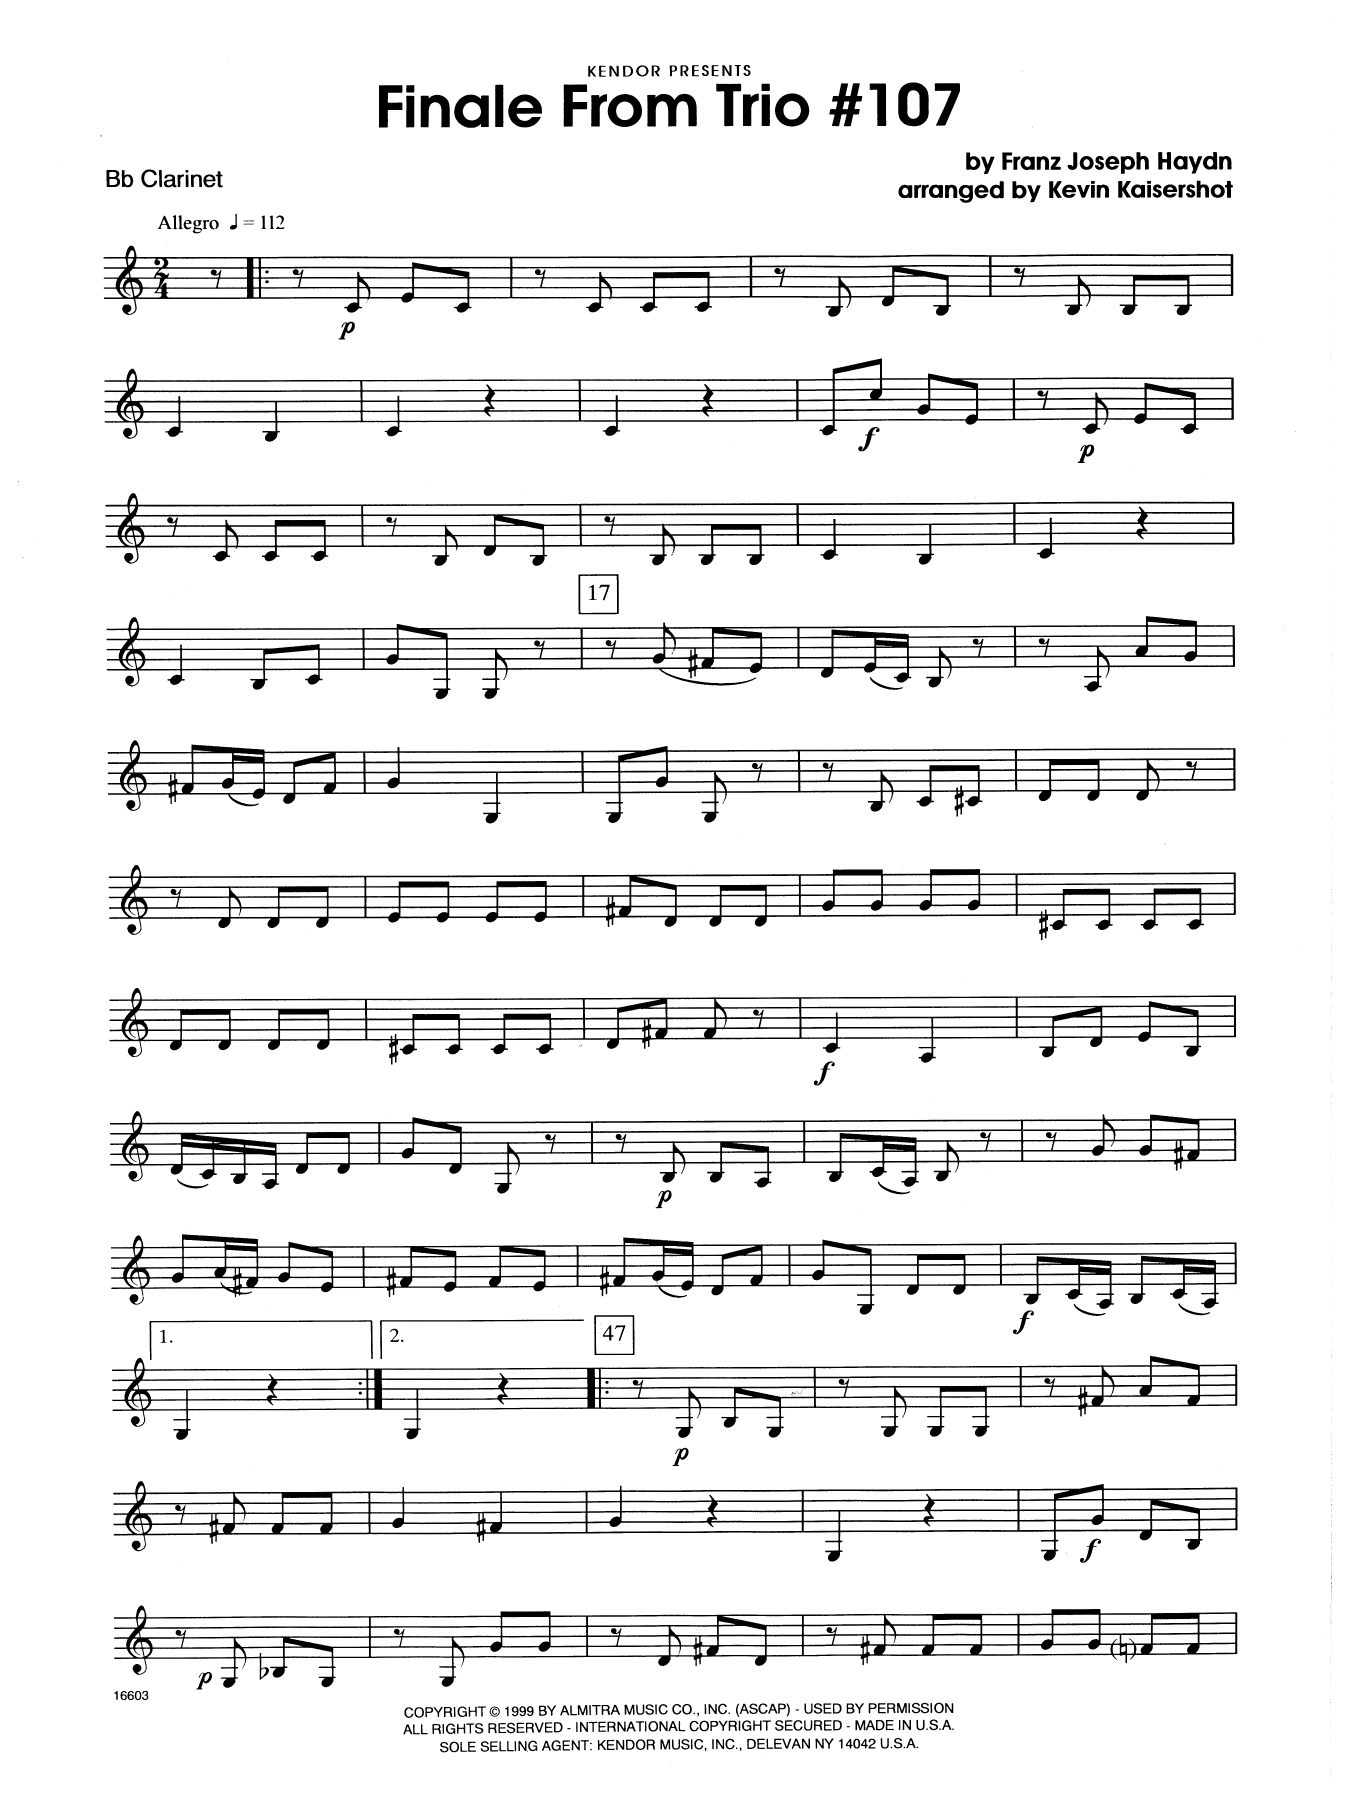 Kevin Kaisershot Finale From Trio #107 - Bb Clarinet sheet music notes and chords. Download Printable PDF.